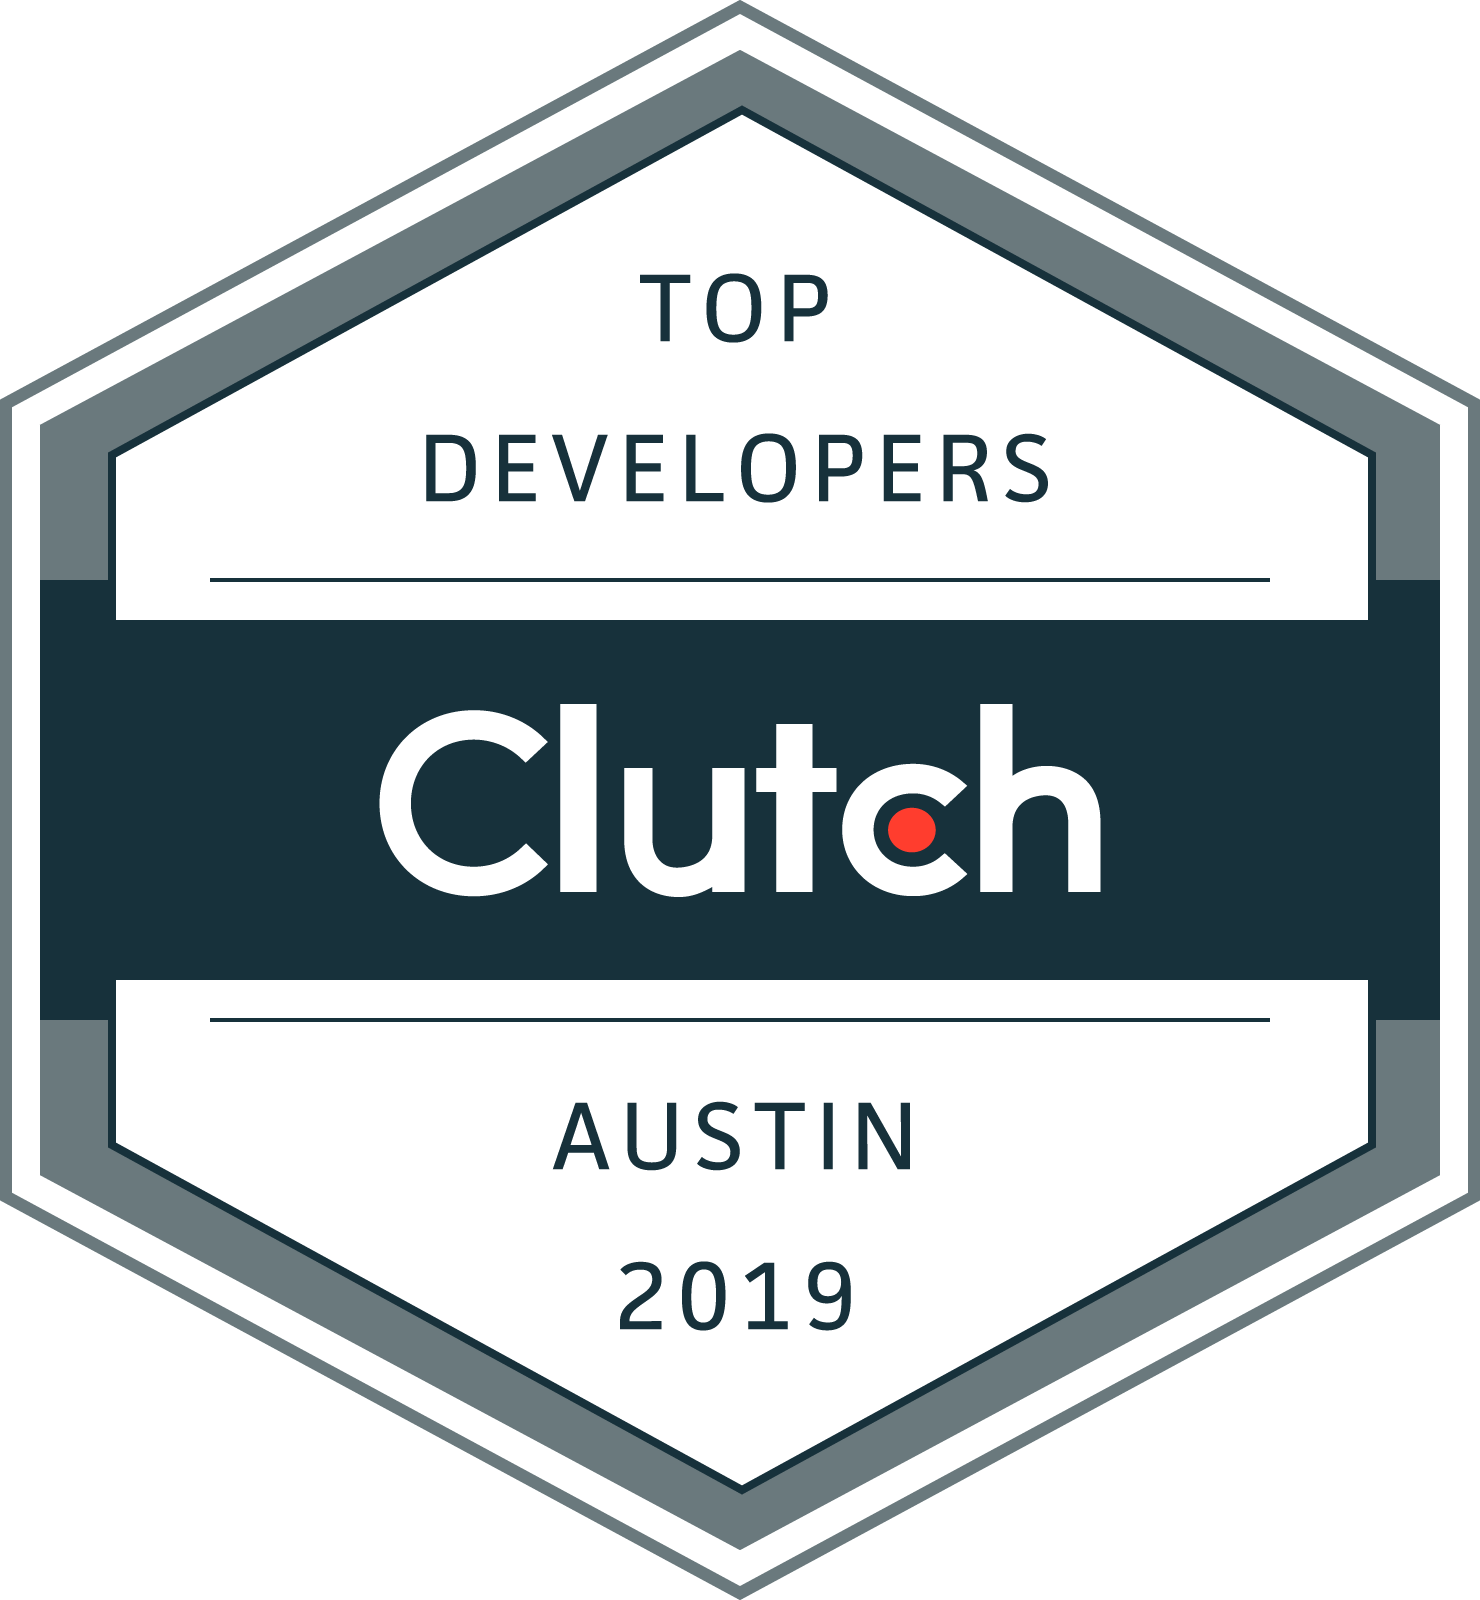 Award for Top Developers for Clutch.co - Austin 2019